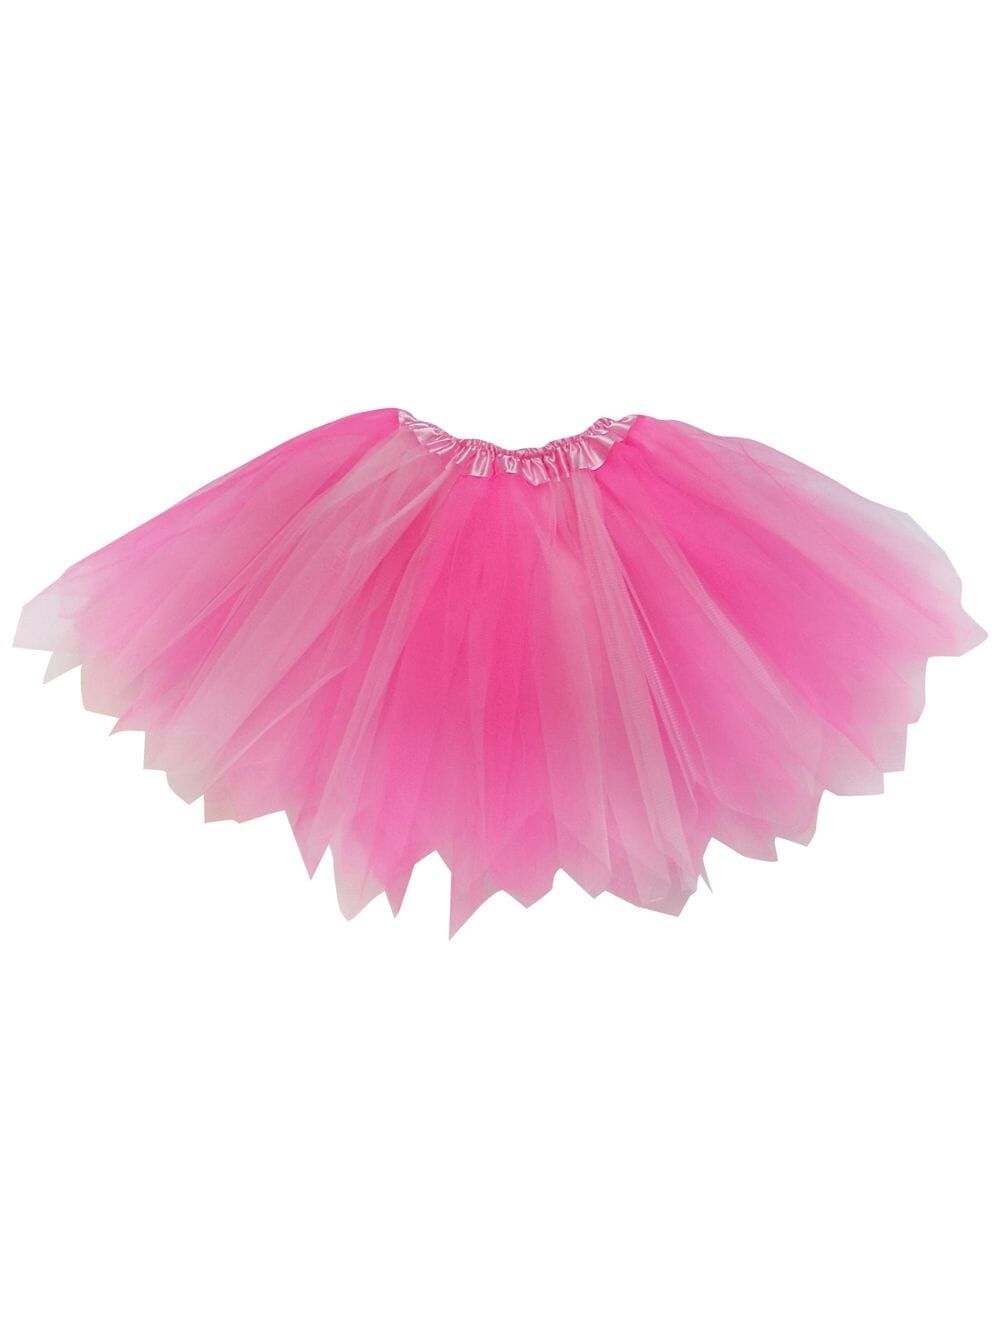 Pink & Neon Pink Fairy Costume Pixie Tutu Skirt for Kids, Adults, Plus - Sydney So Sweet